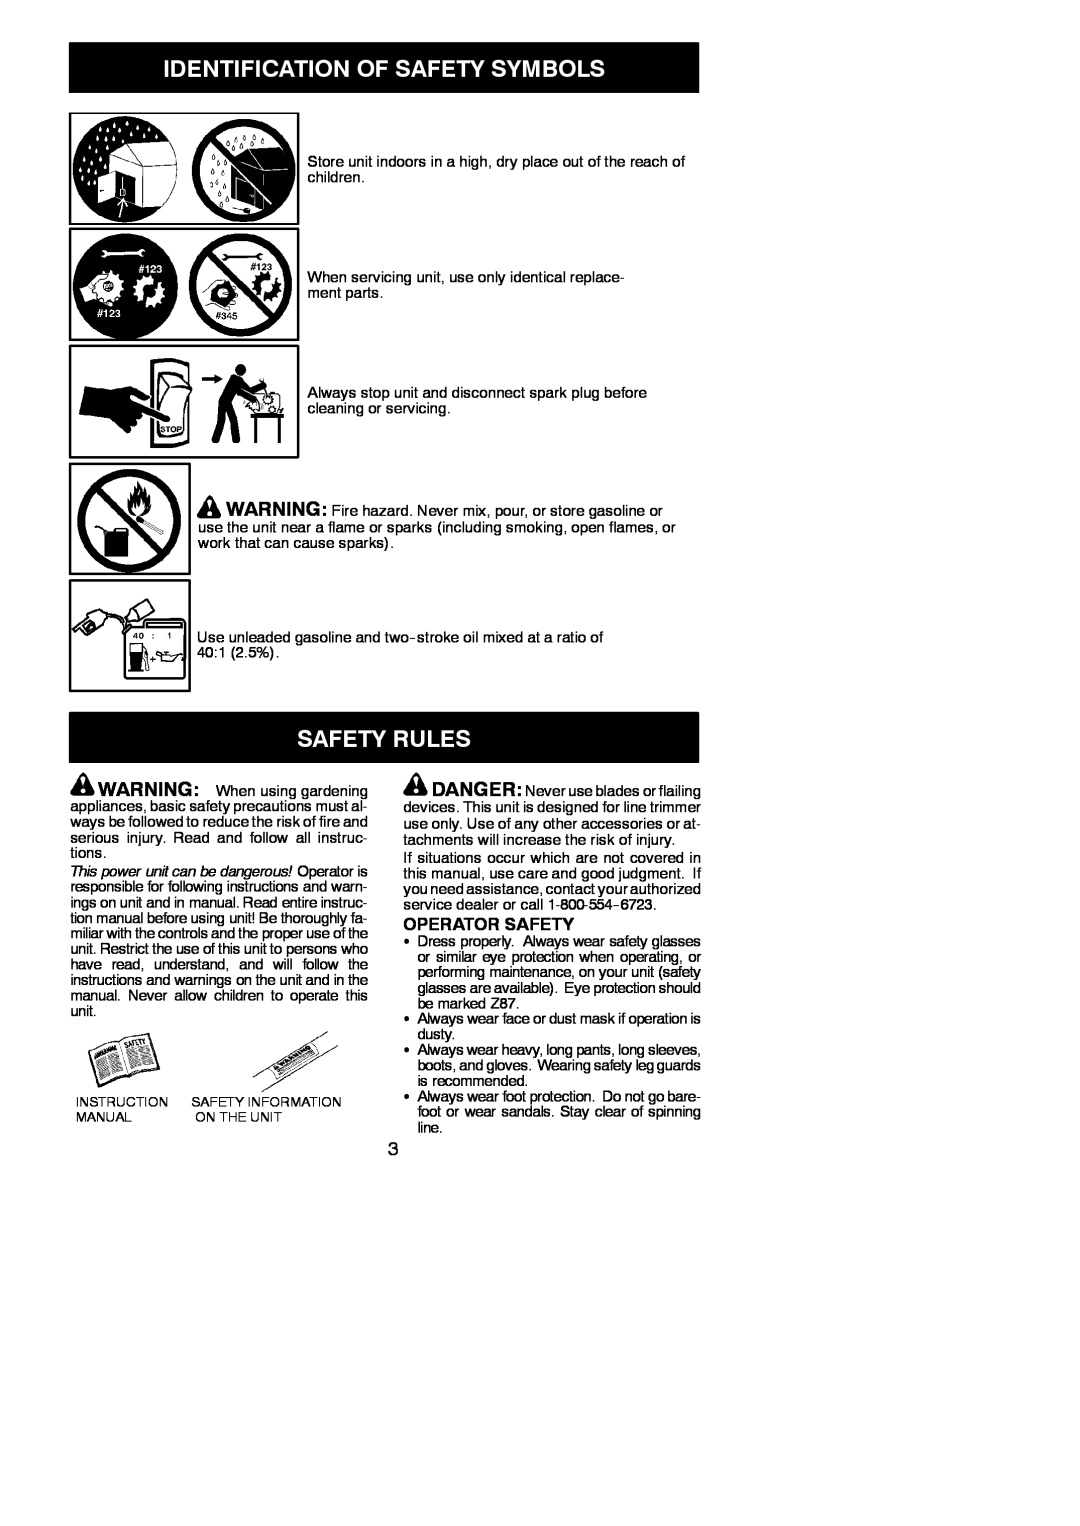 Weed Eater FX26 instruction manual Safety Rules, Identification Of Safety Symbols, Operator Safety 